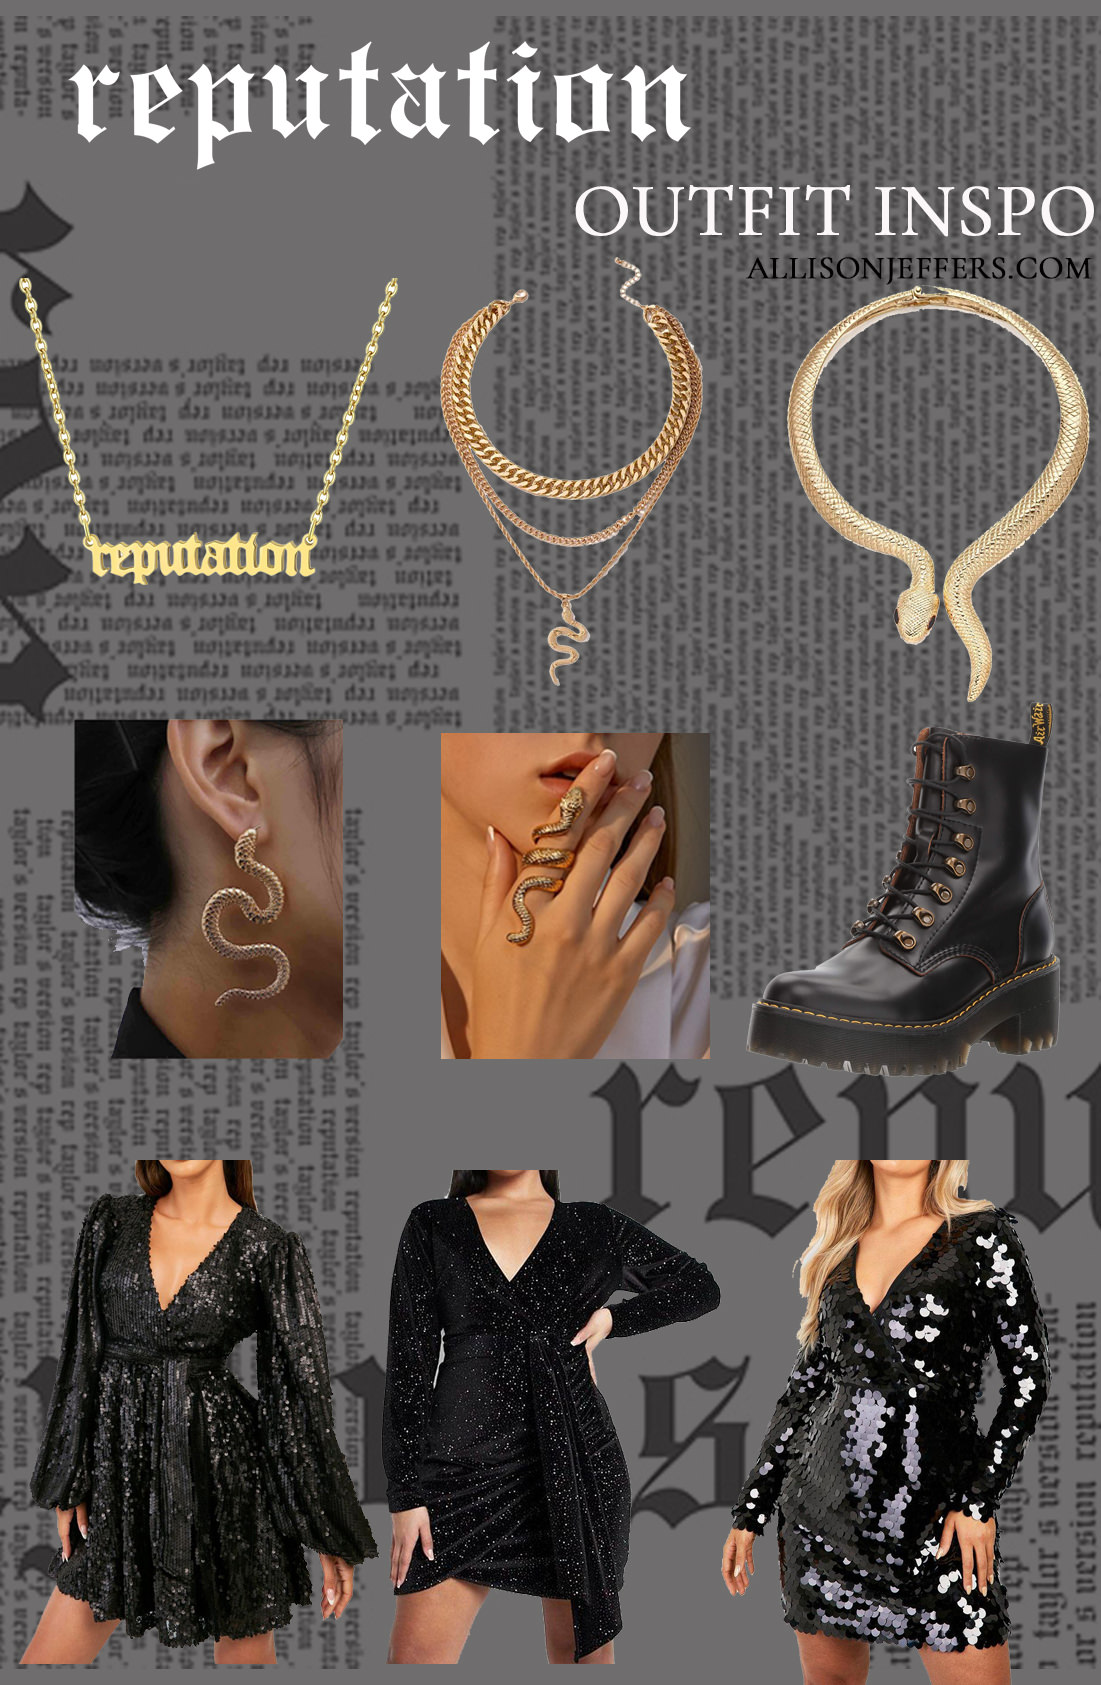 taylor swift eras tour reputation outfit ideas eras concert black and gold dresses and accessories copy